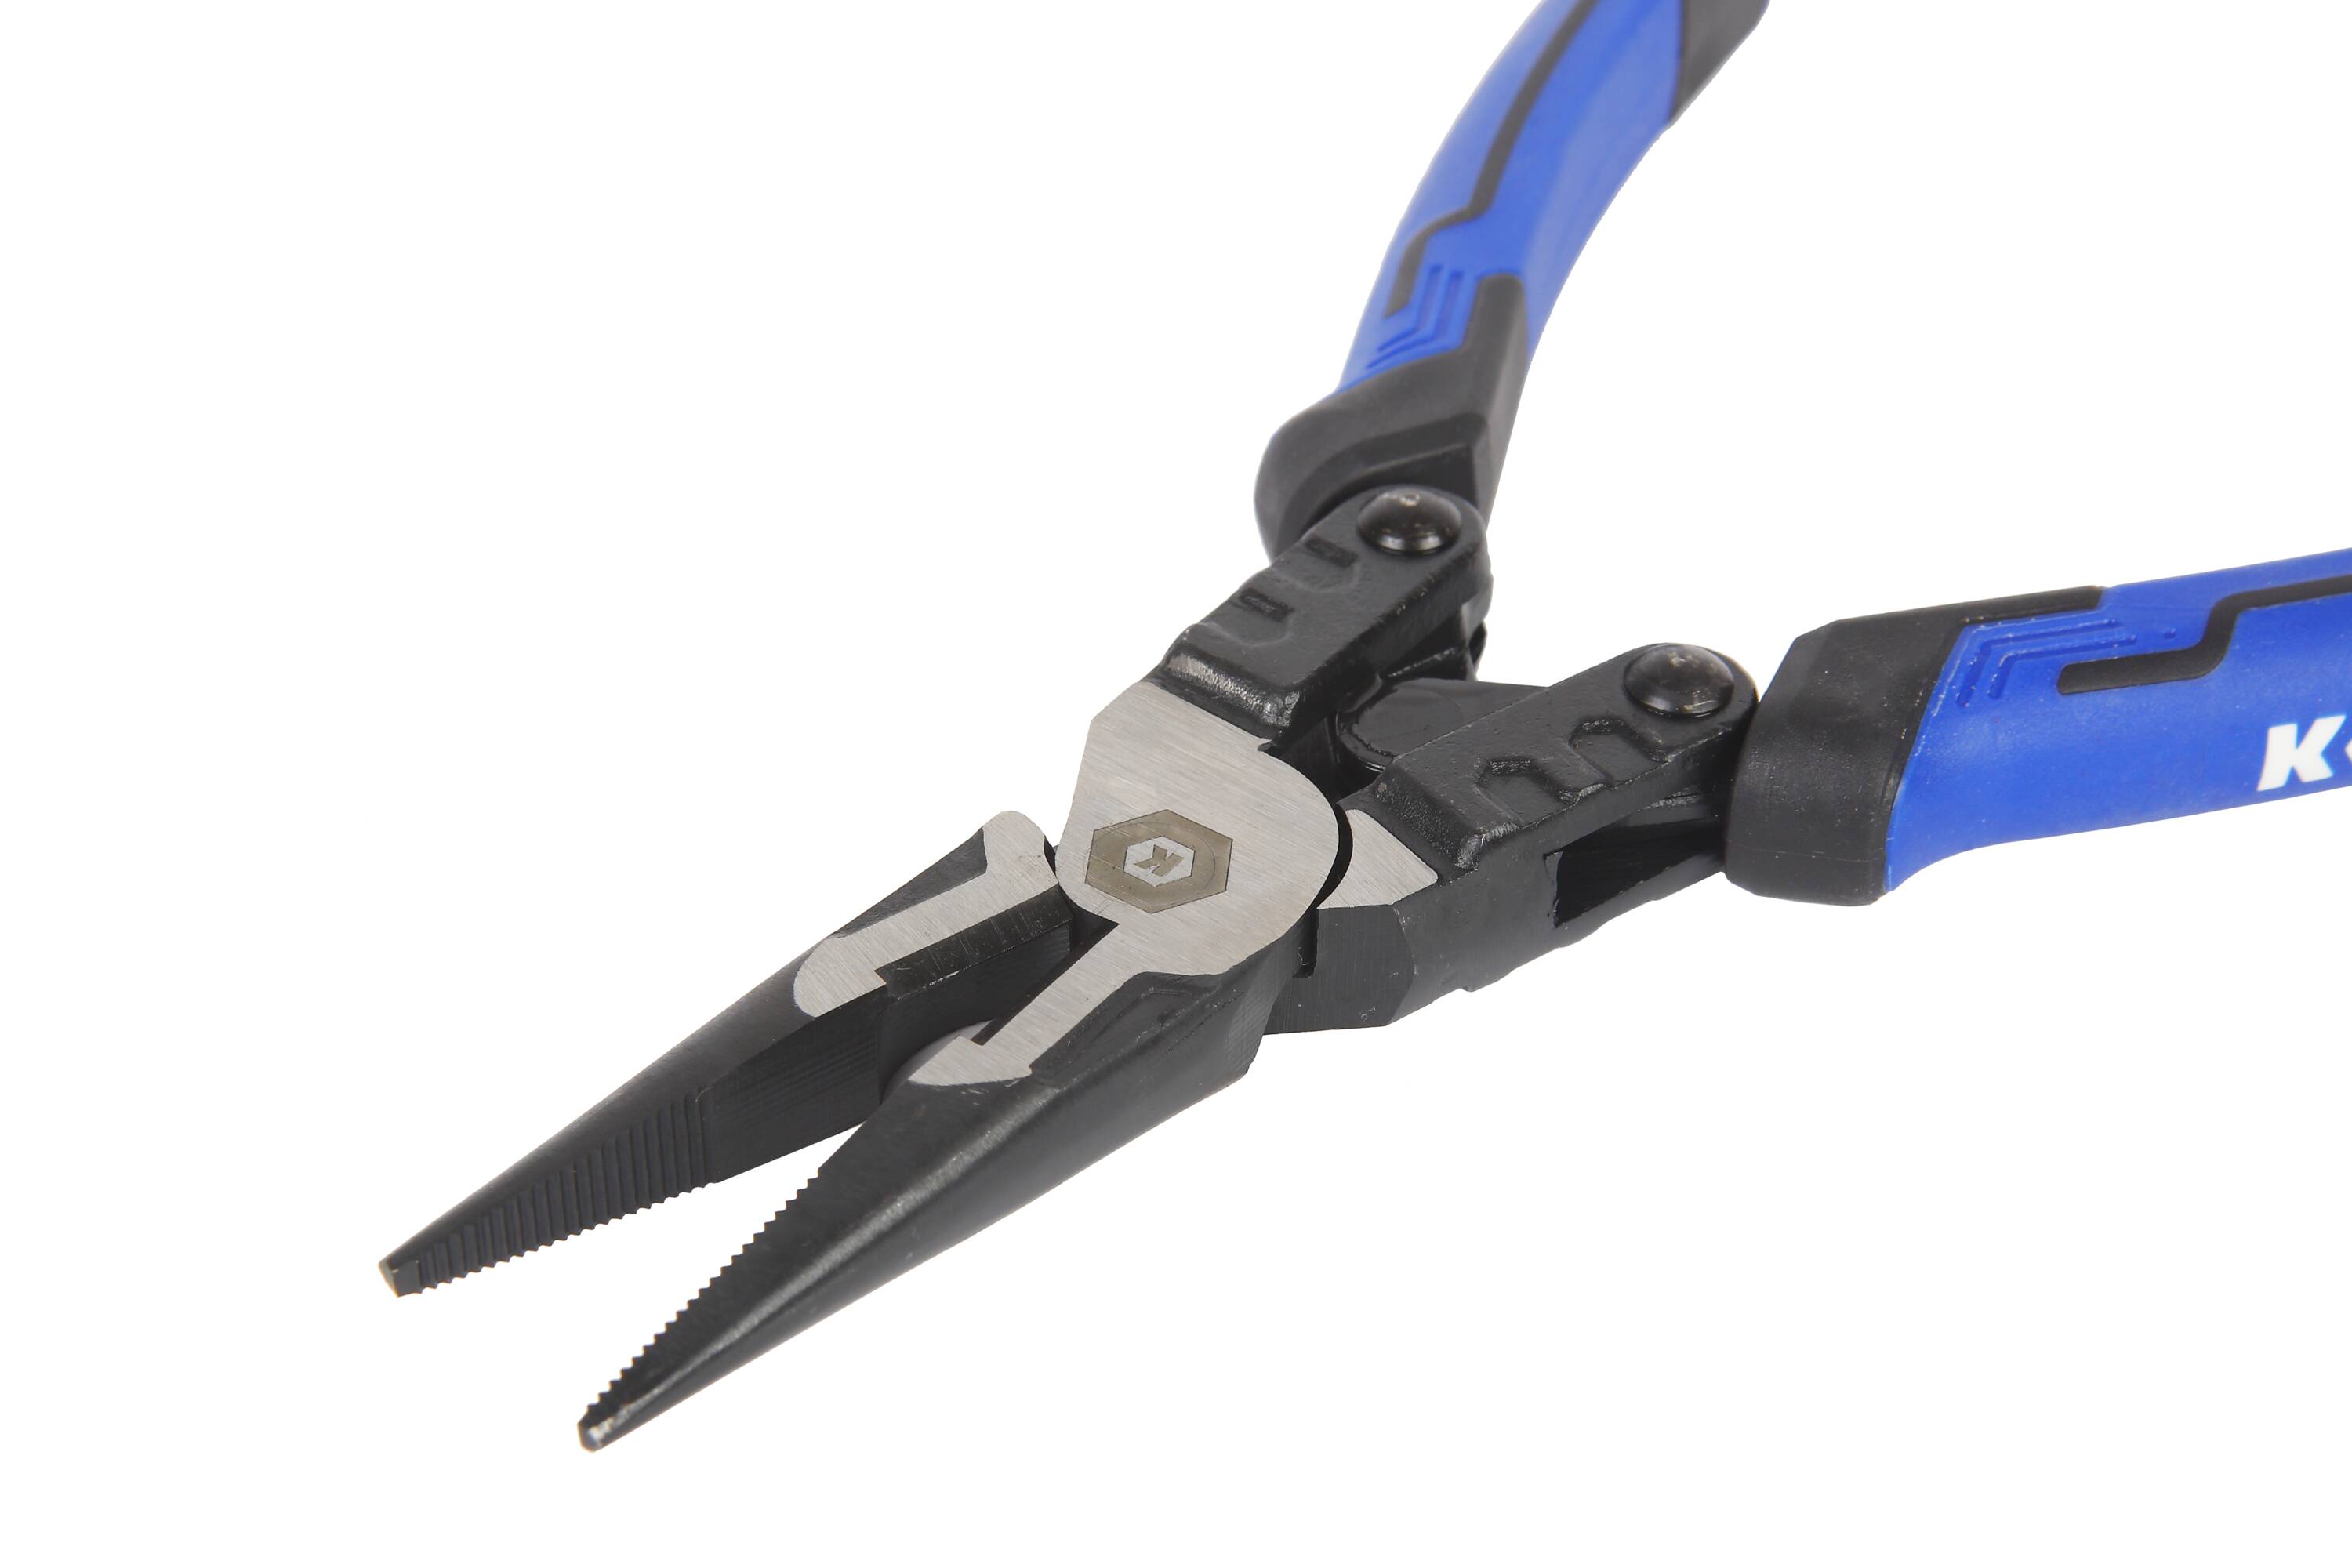 Kobalt 5.5-in Home Repair Diagonal Cutting Pliers with Wire Cutter